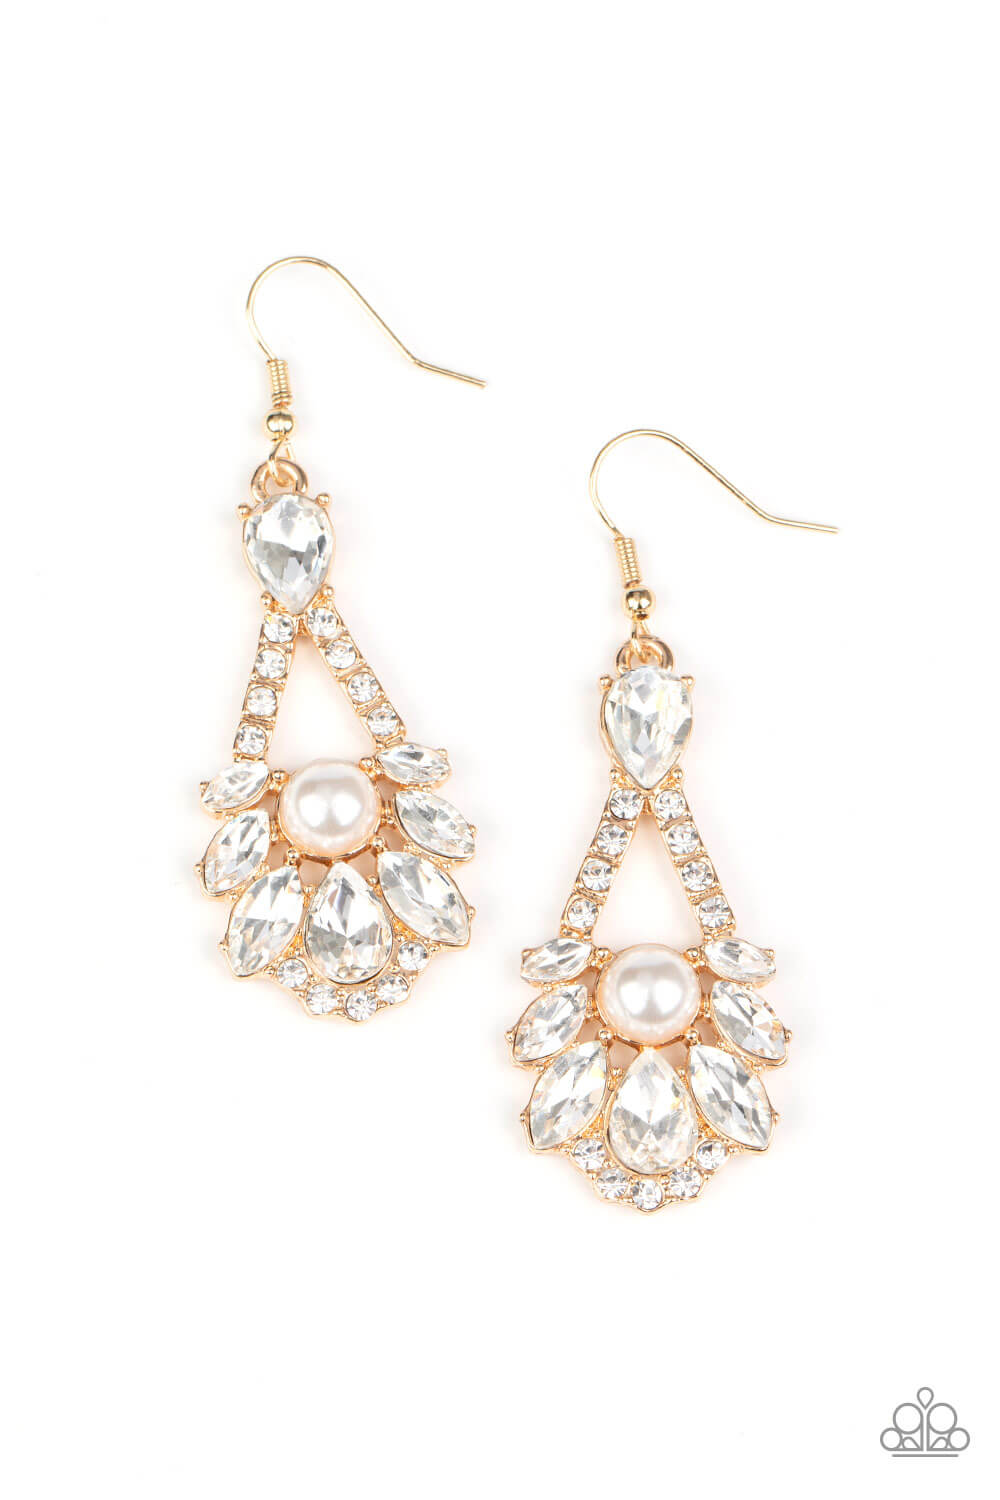 Prismatic Presence Gold Earrings February Life of the Party Exclusive - Princess Glam Shop